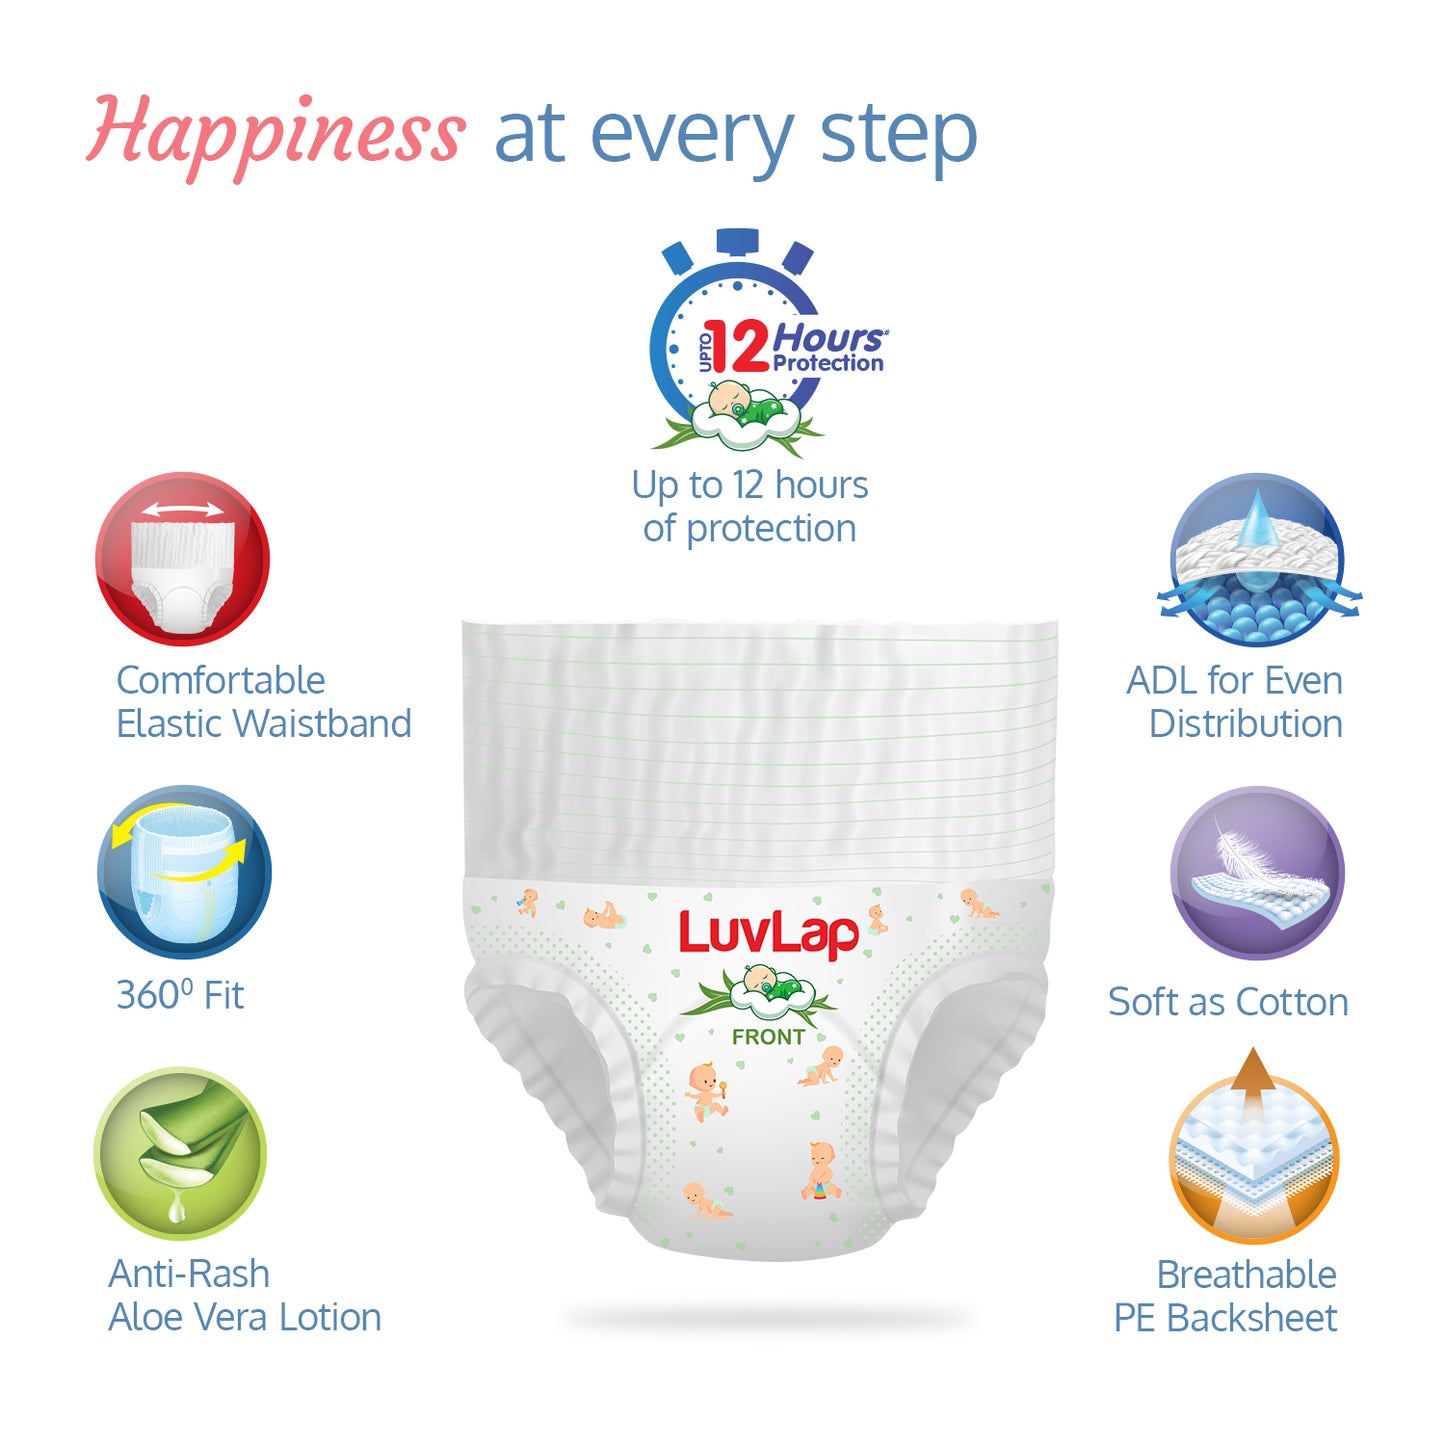 Diaper Pants Large (LG) 9 to 14Kg, Super Jumbo Pack (62 Count x 2 = 124 Count)